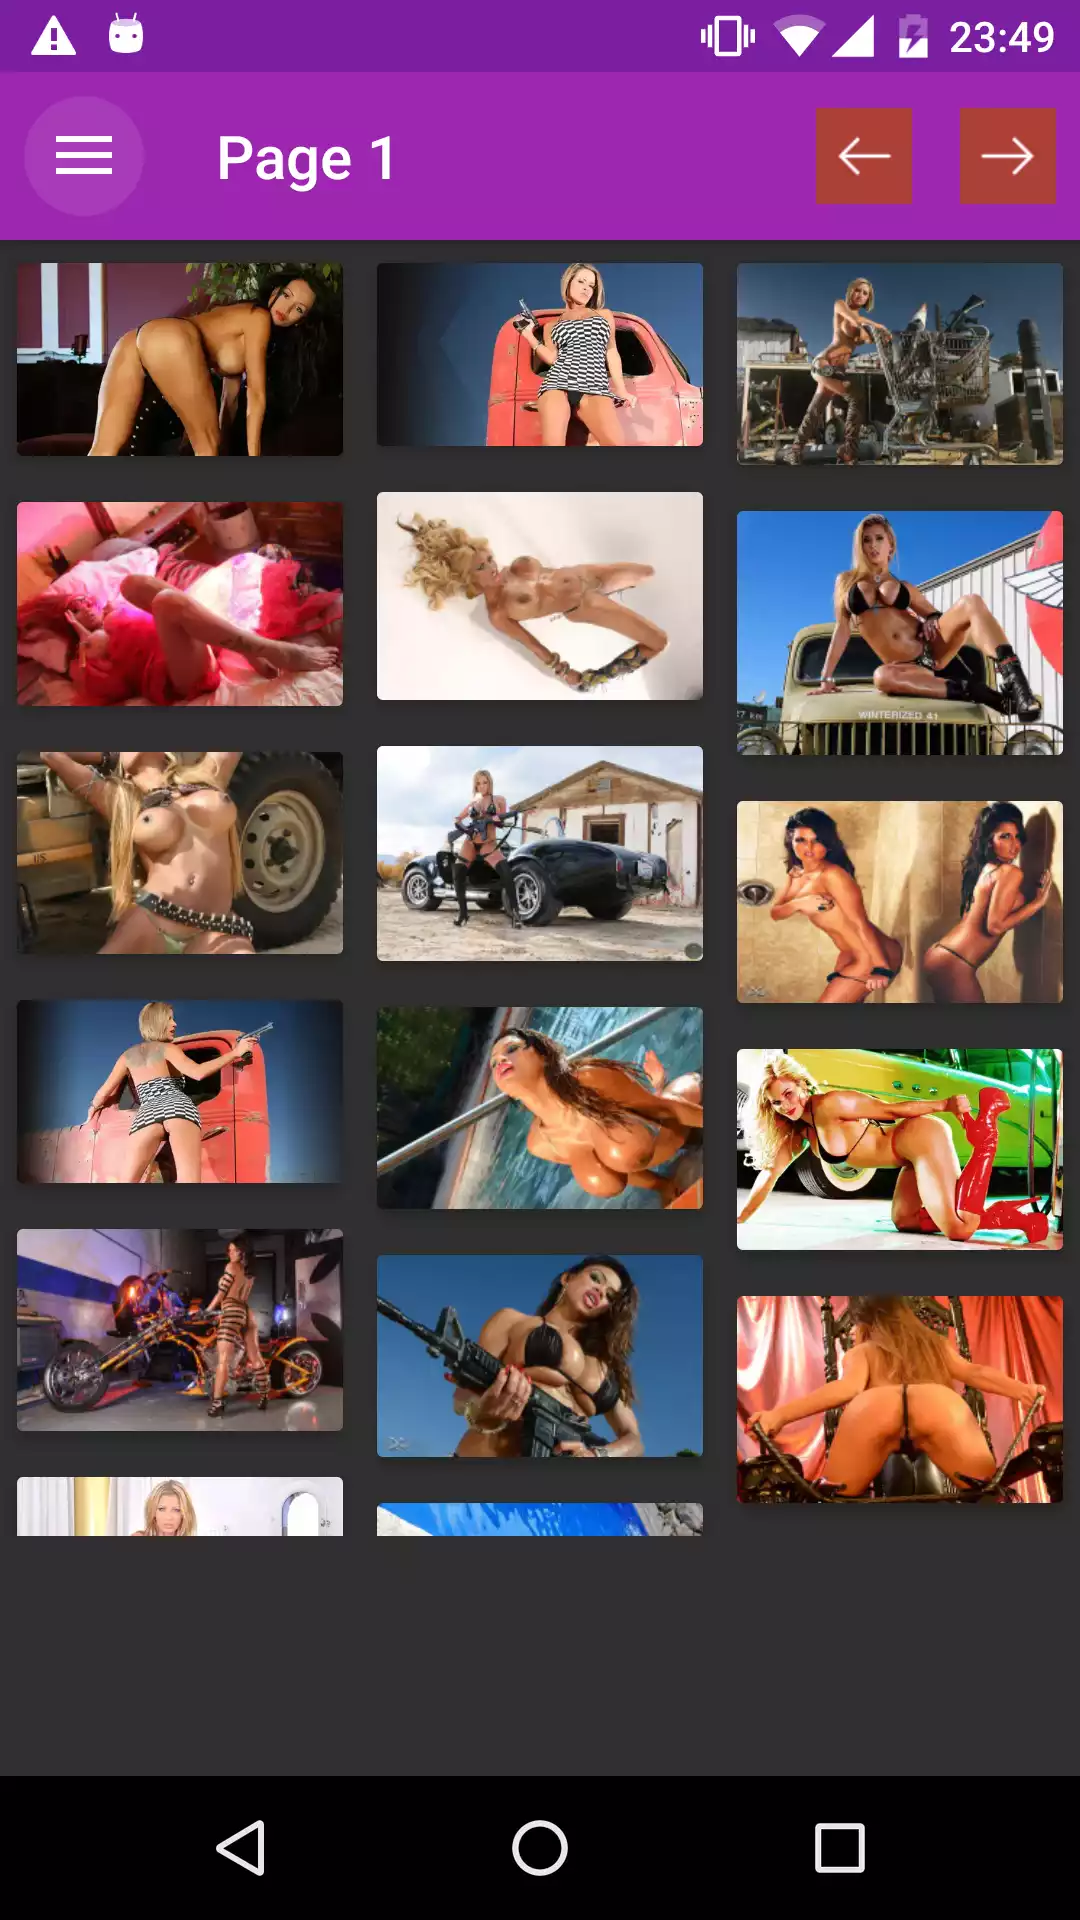 Action Wallpapers hentsi,stars,best,sexy,puzzles,with,images,panties,offline,android,wallpaper,hentai,ios,chicks,app,for,and,apk,hotmilfpics,porn,updates,dicks,comics,pics,erotic,backgrounds,wallpapers